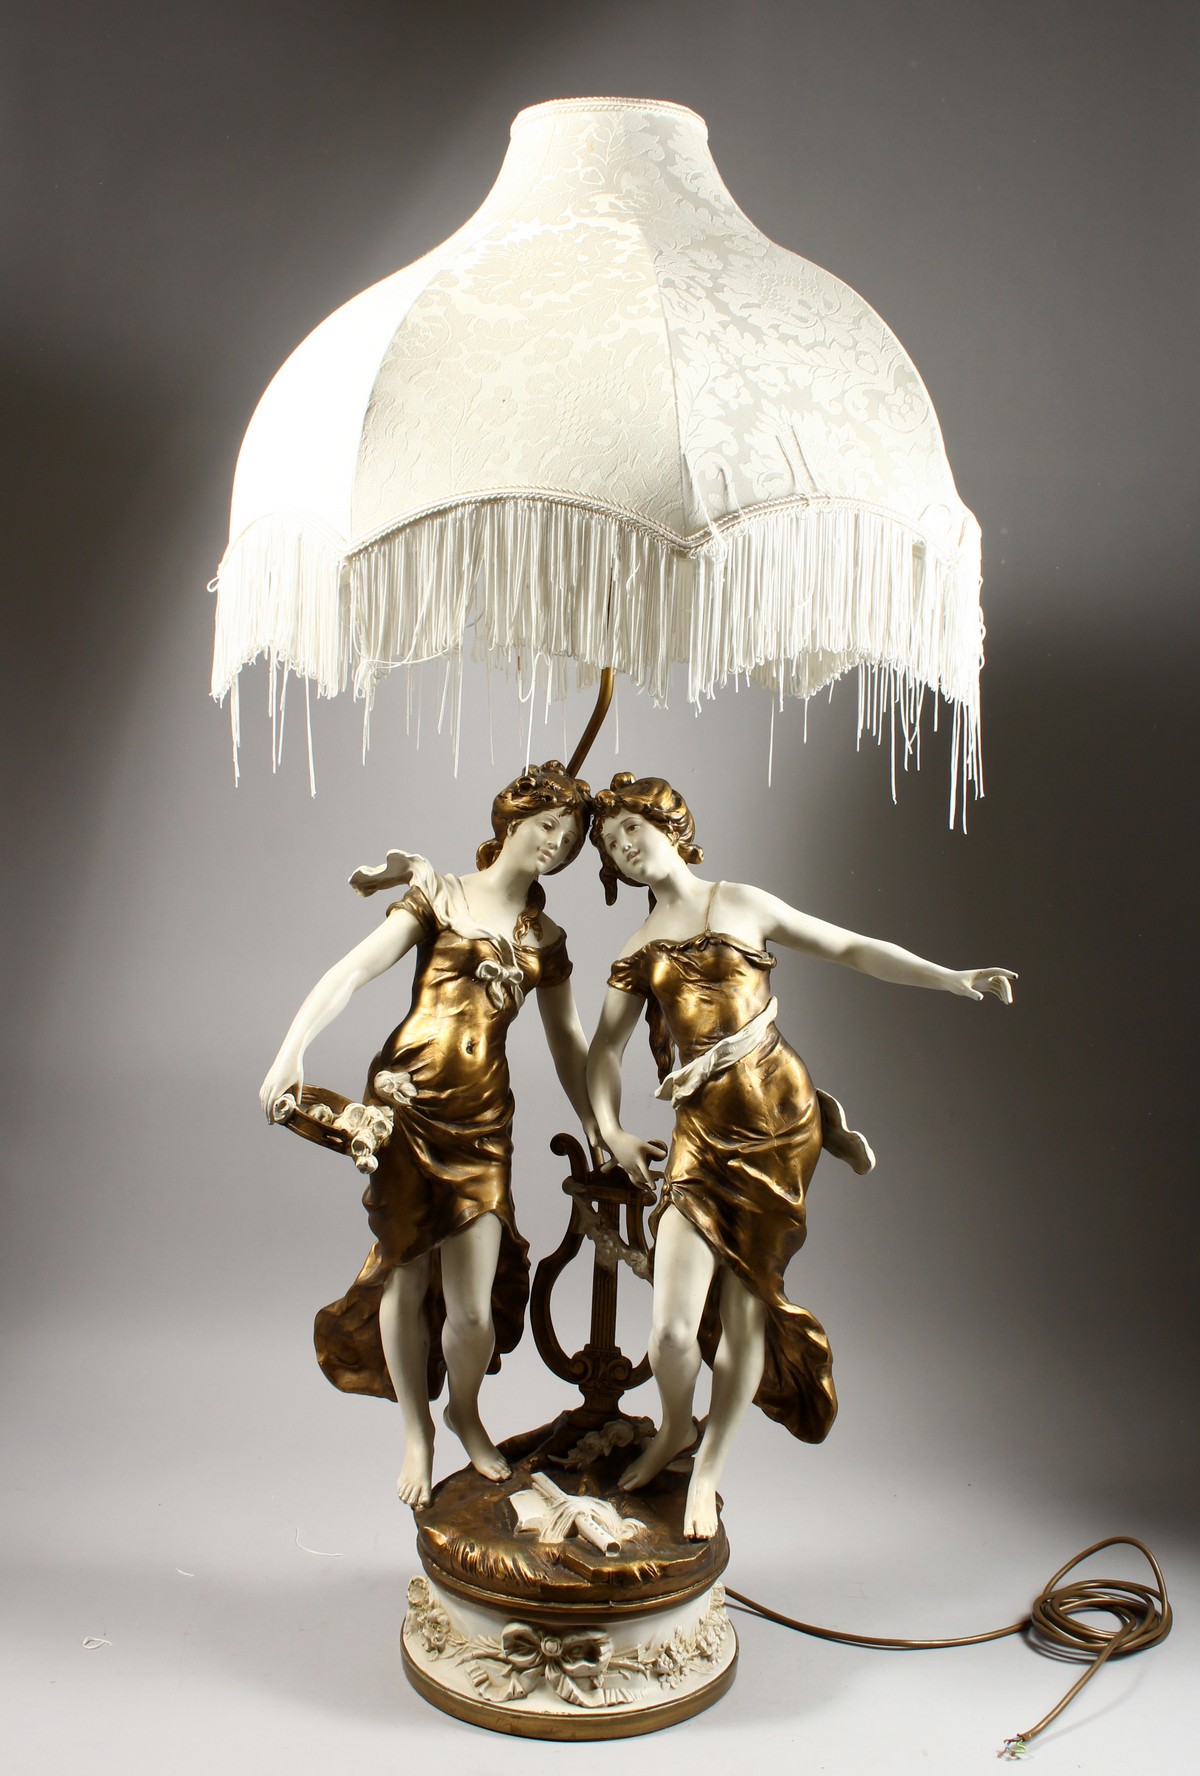 AN ORNATE ART NOUVEAU STYLE PAINTED CAST METAL TABLE LAMP, modelled as two young ladies standing - Image 2 of 3